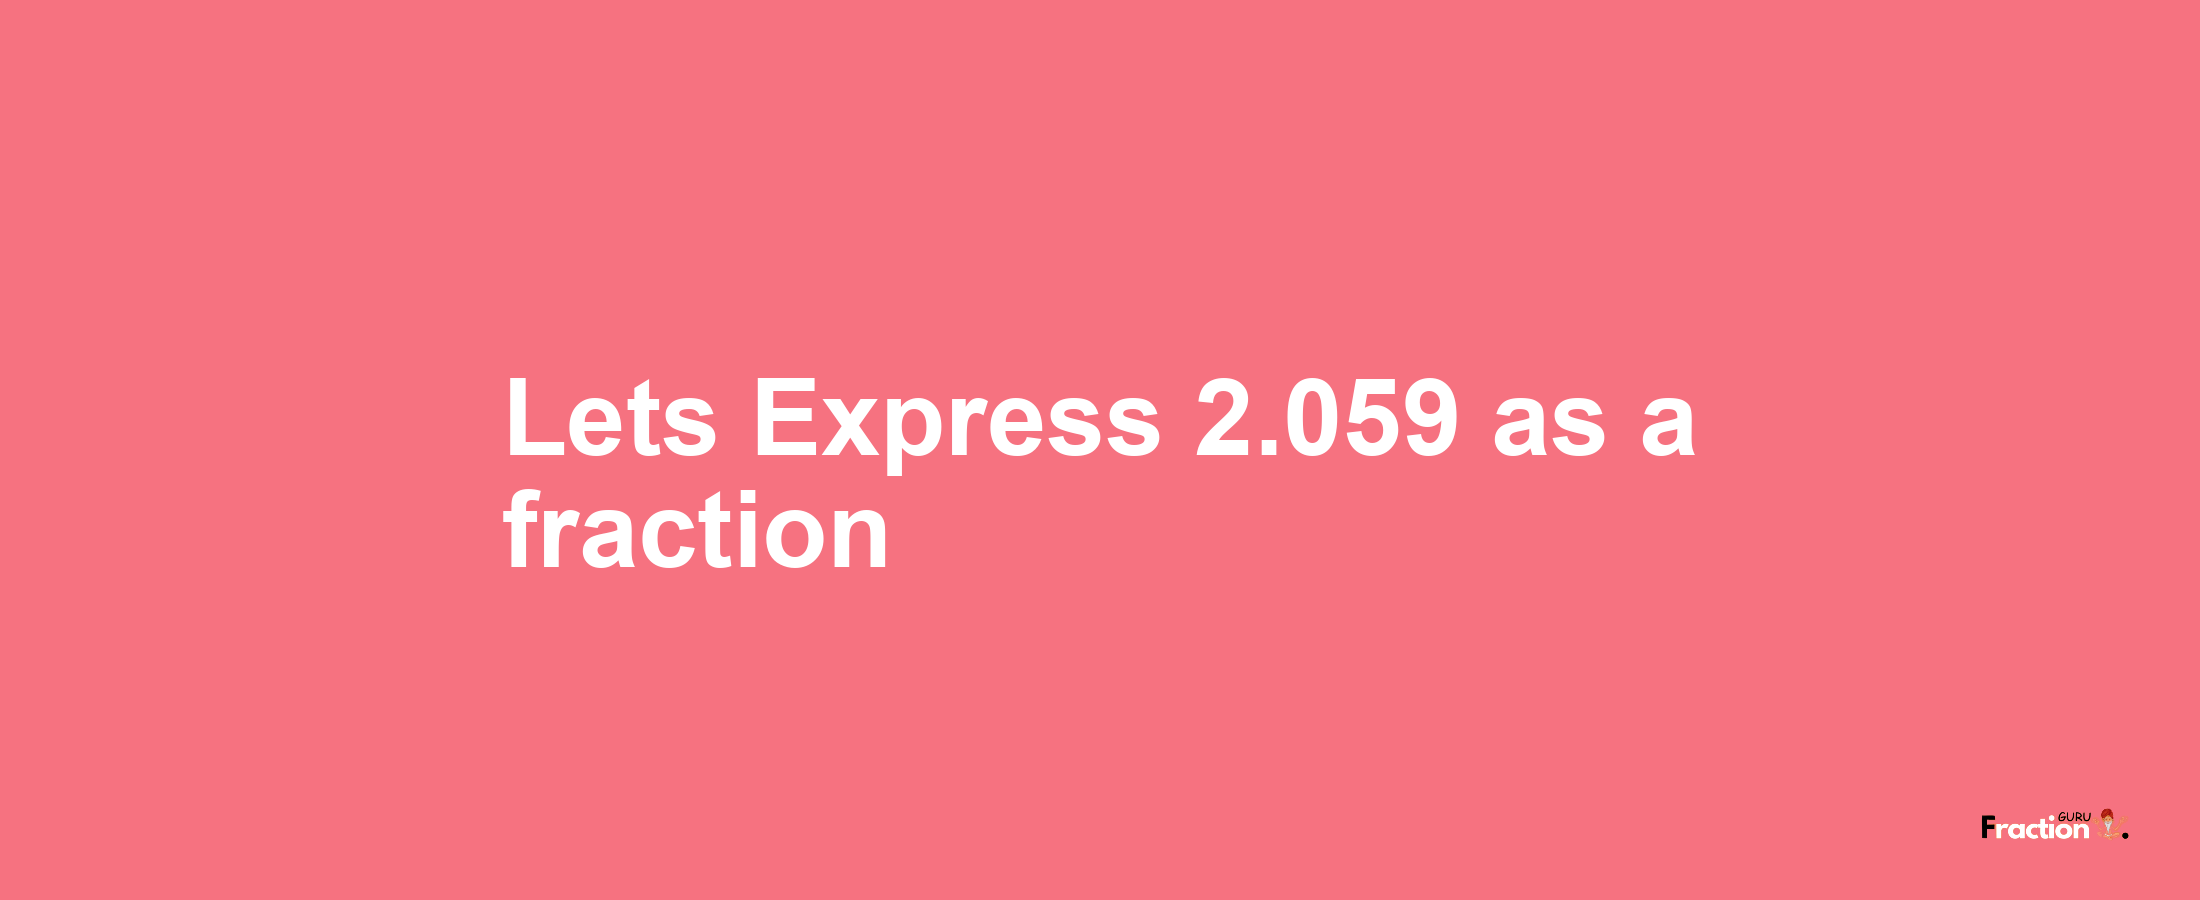 Lets Express 2.059 as afraction